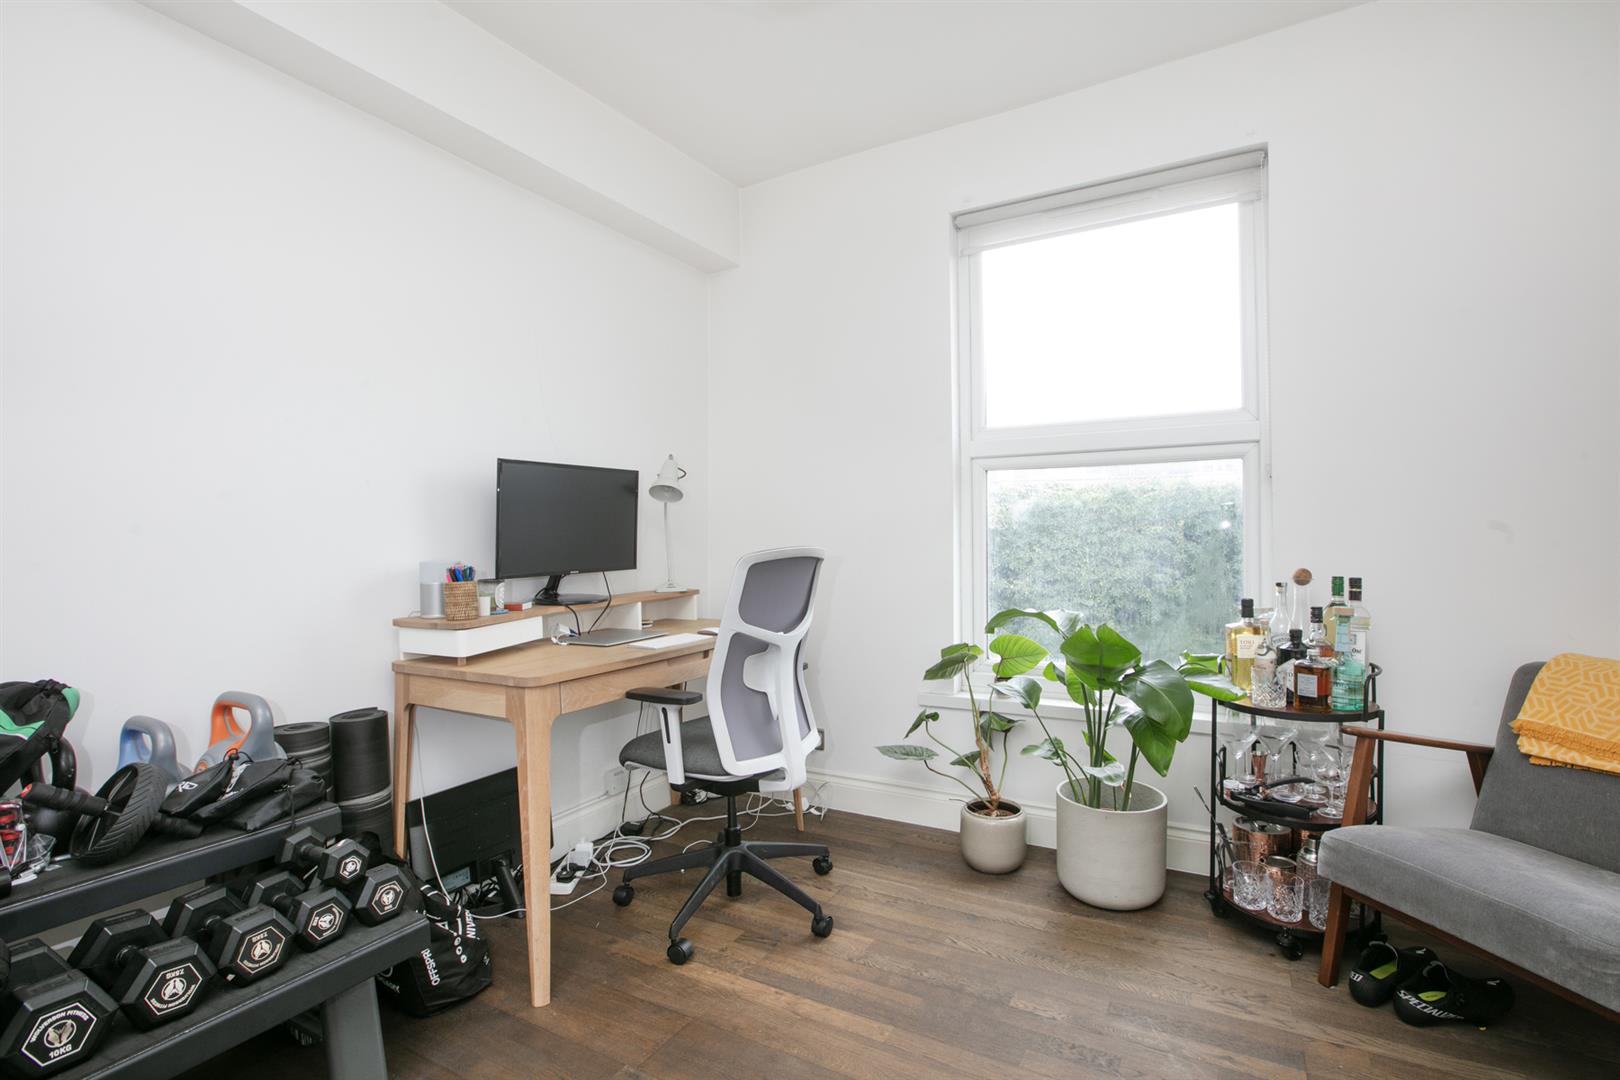 Flat - Conversion For Sale in Coldharbour Lane, Camberwell, SE5 1178 view9